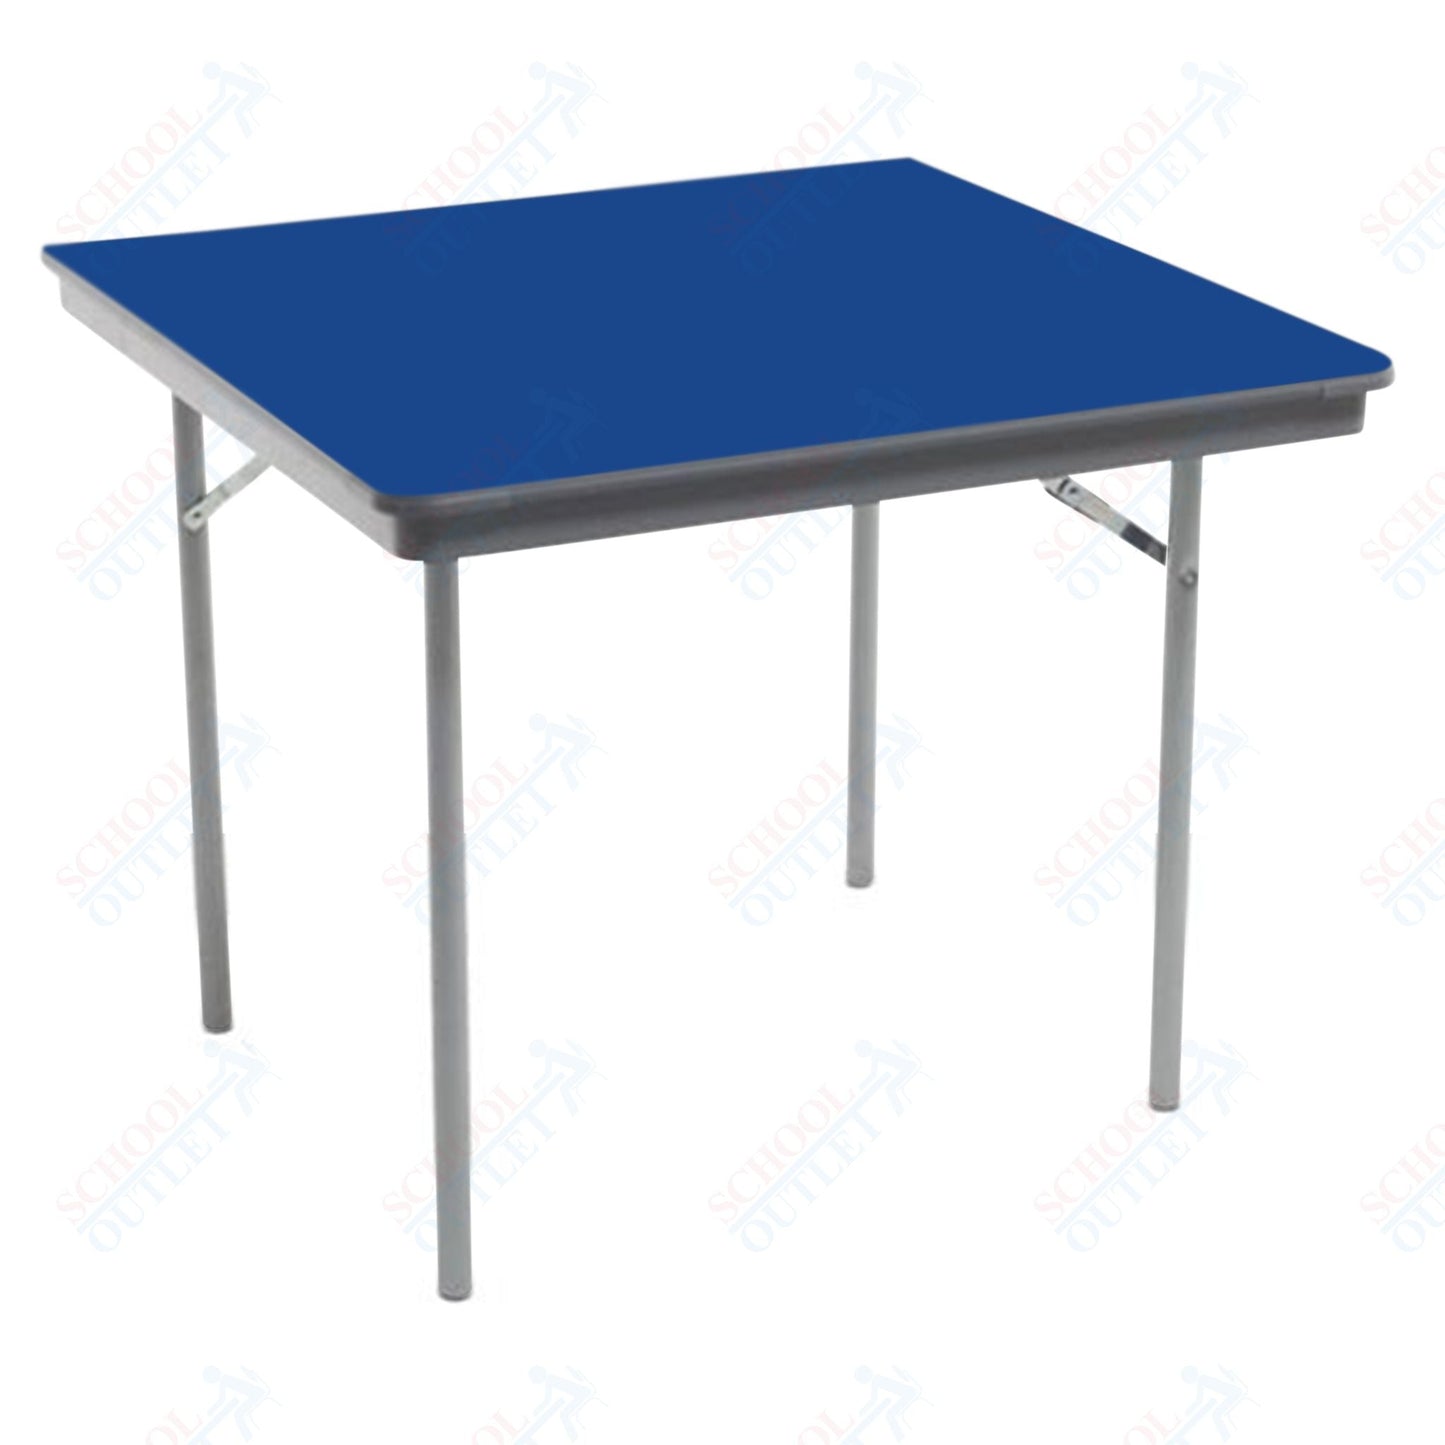 AmTab Dynalite Featherweight Heavy - Duty ABS Plastic Folding Table - Square - 48"W x 48"L x 29"H (AmTab AMT - SQ48DL) - SchoolOutlet